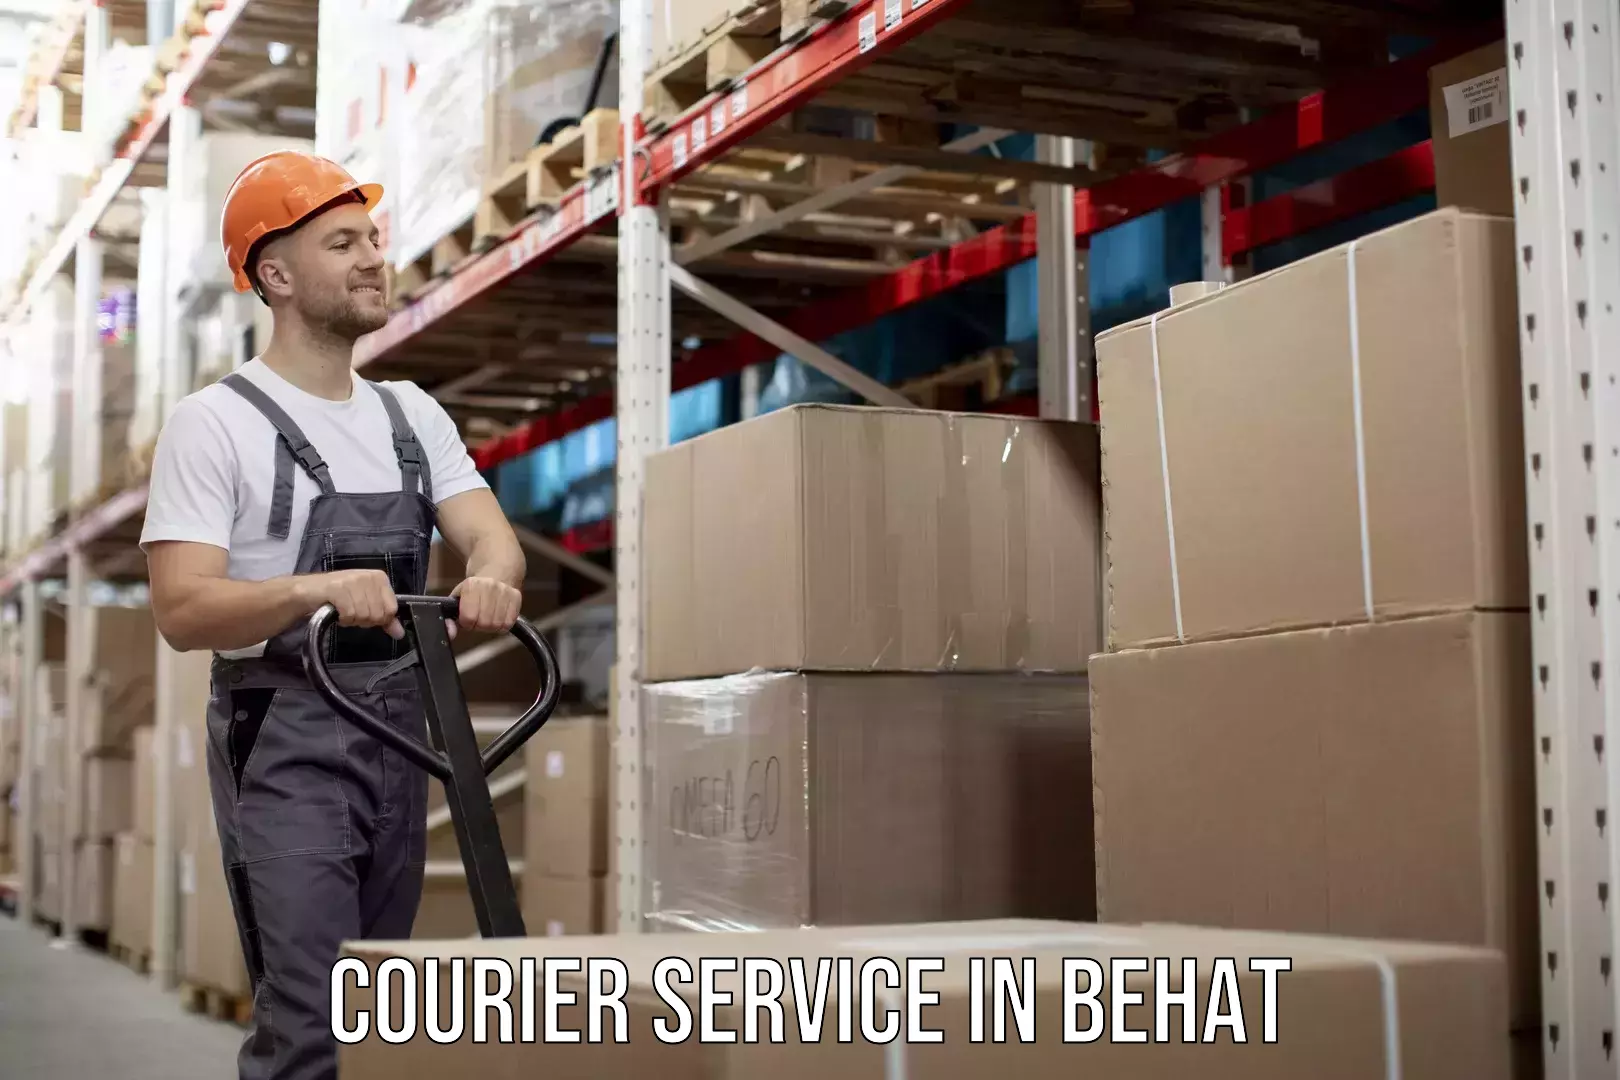 Next-day freight services in Behat